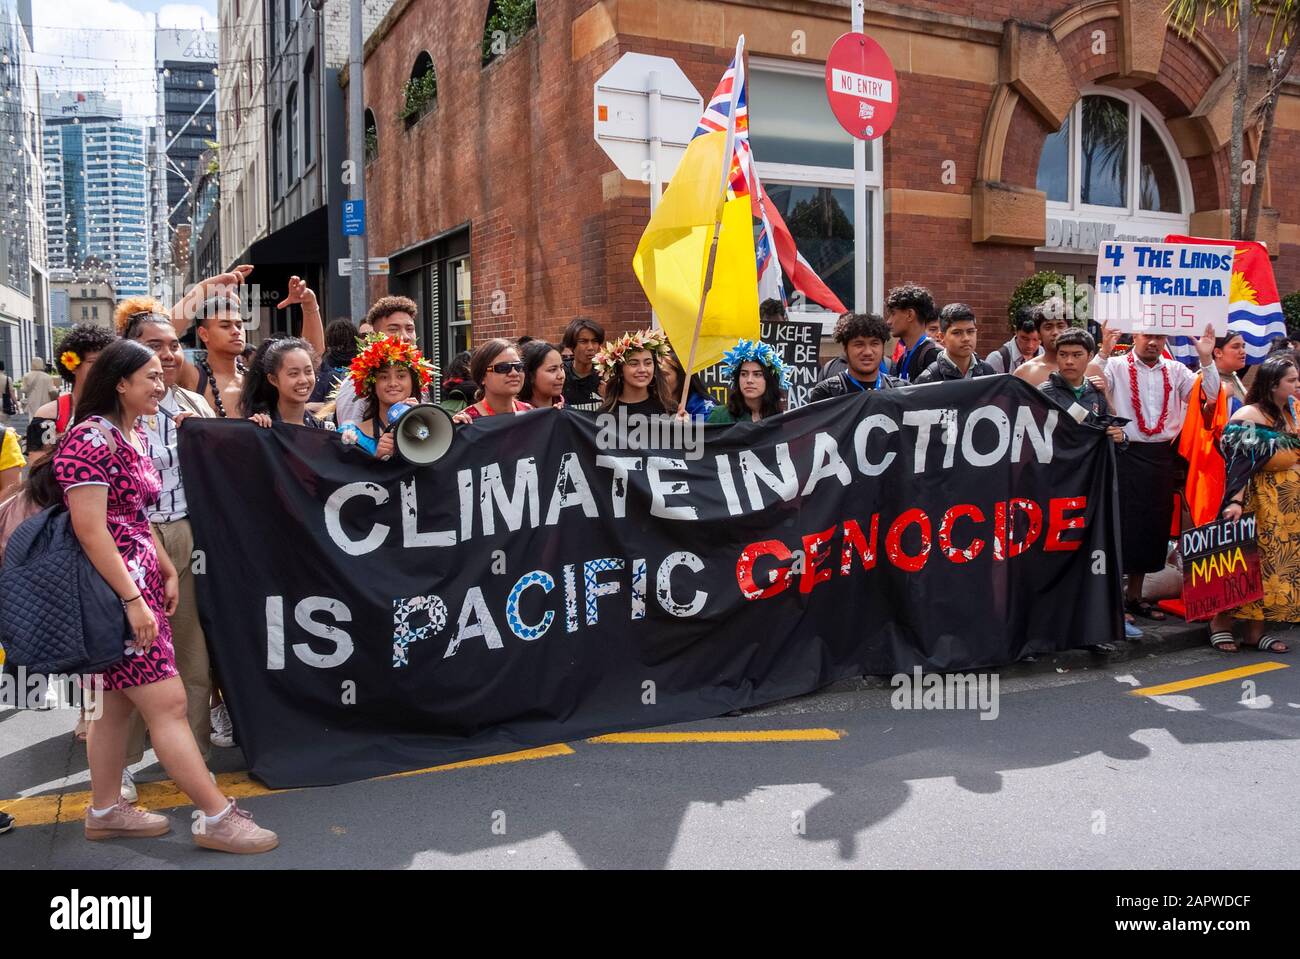 Pacific young people protest that climate change inaction is Pacific genocide. Auckland, New Zealand Stock Photo